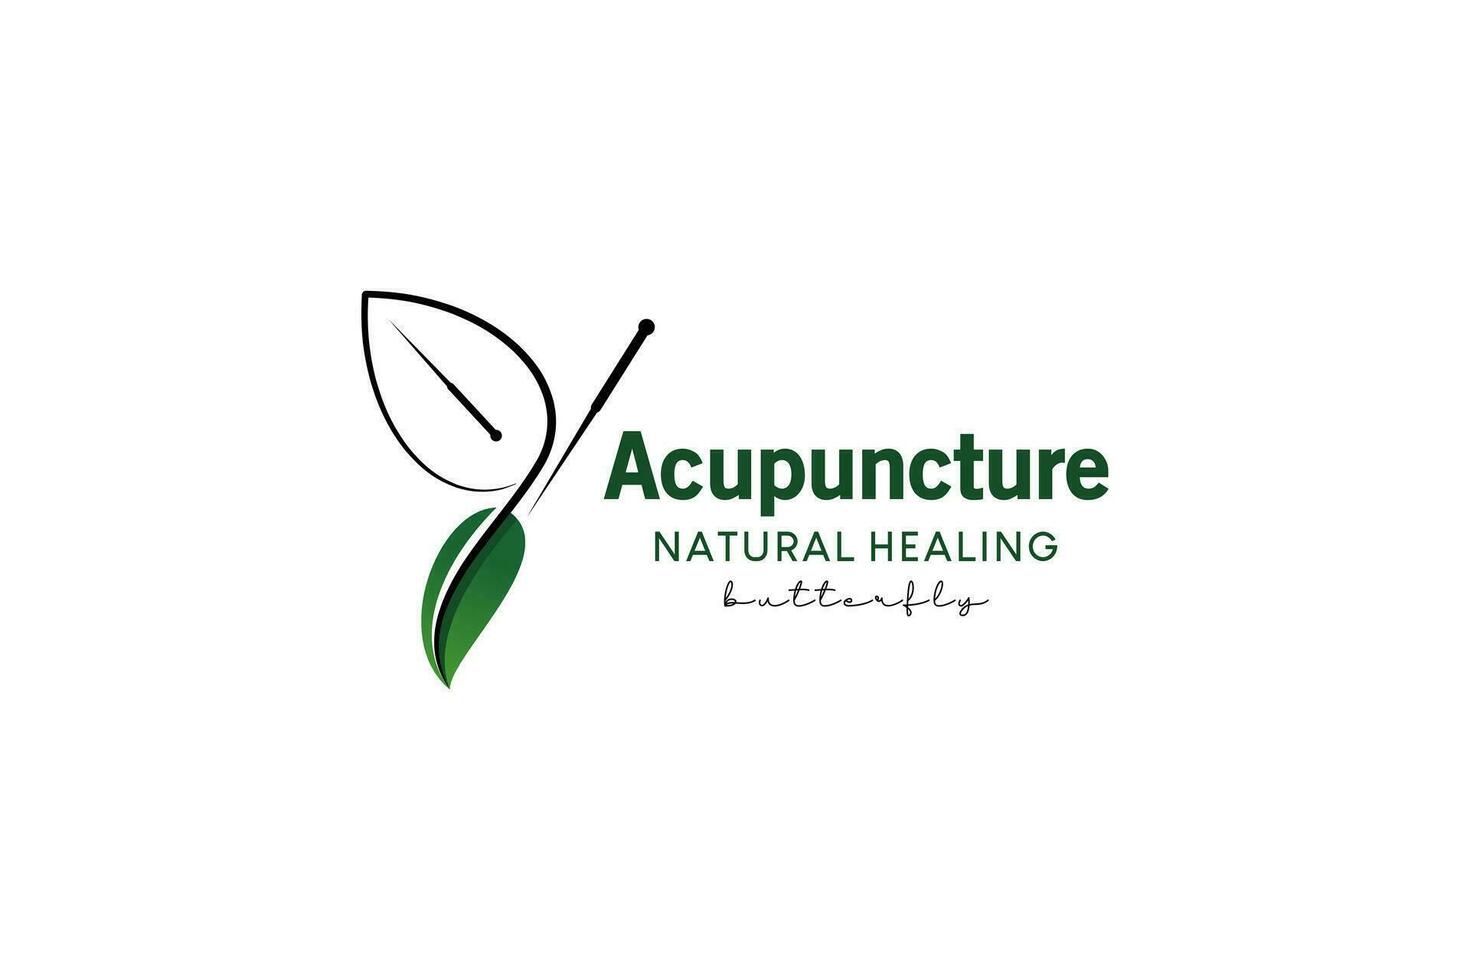 Butterfly acupuncture logo design, natural acupuncture treatment and healing logo vector